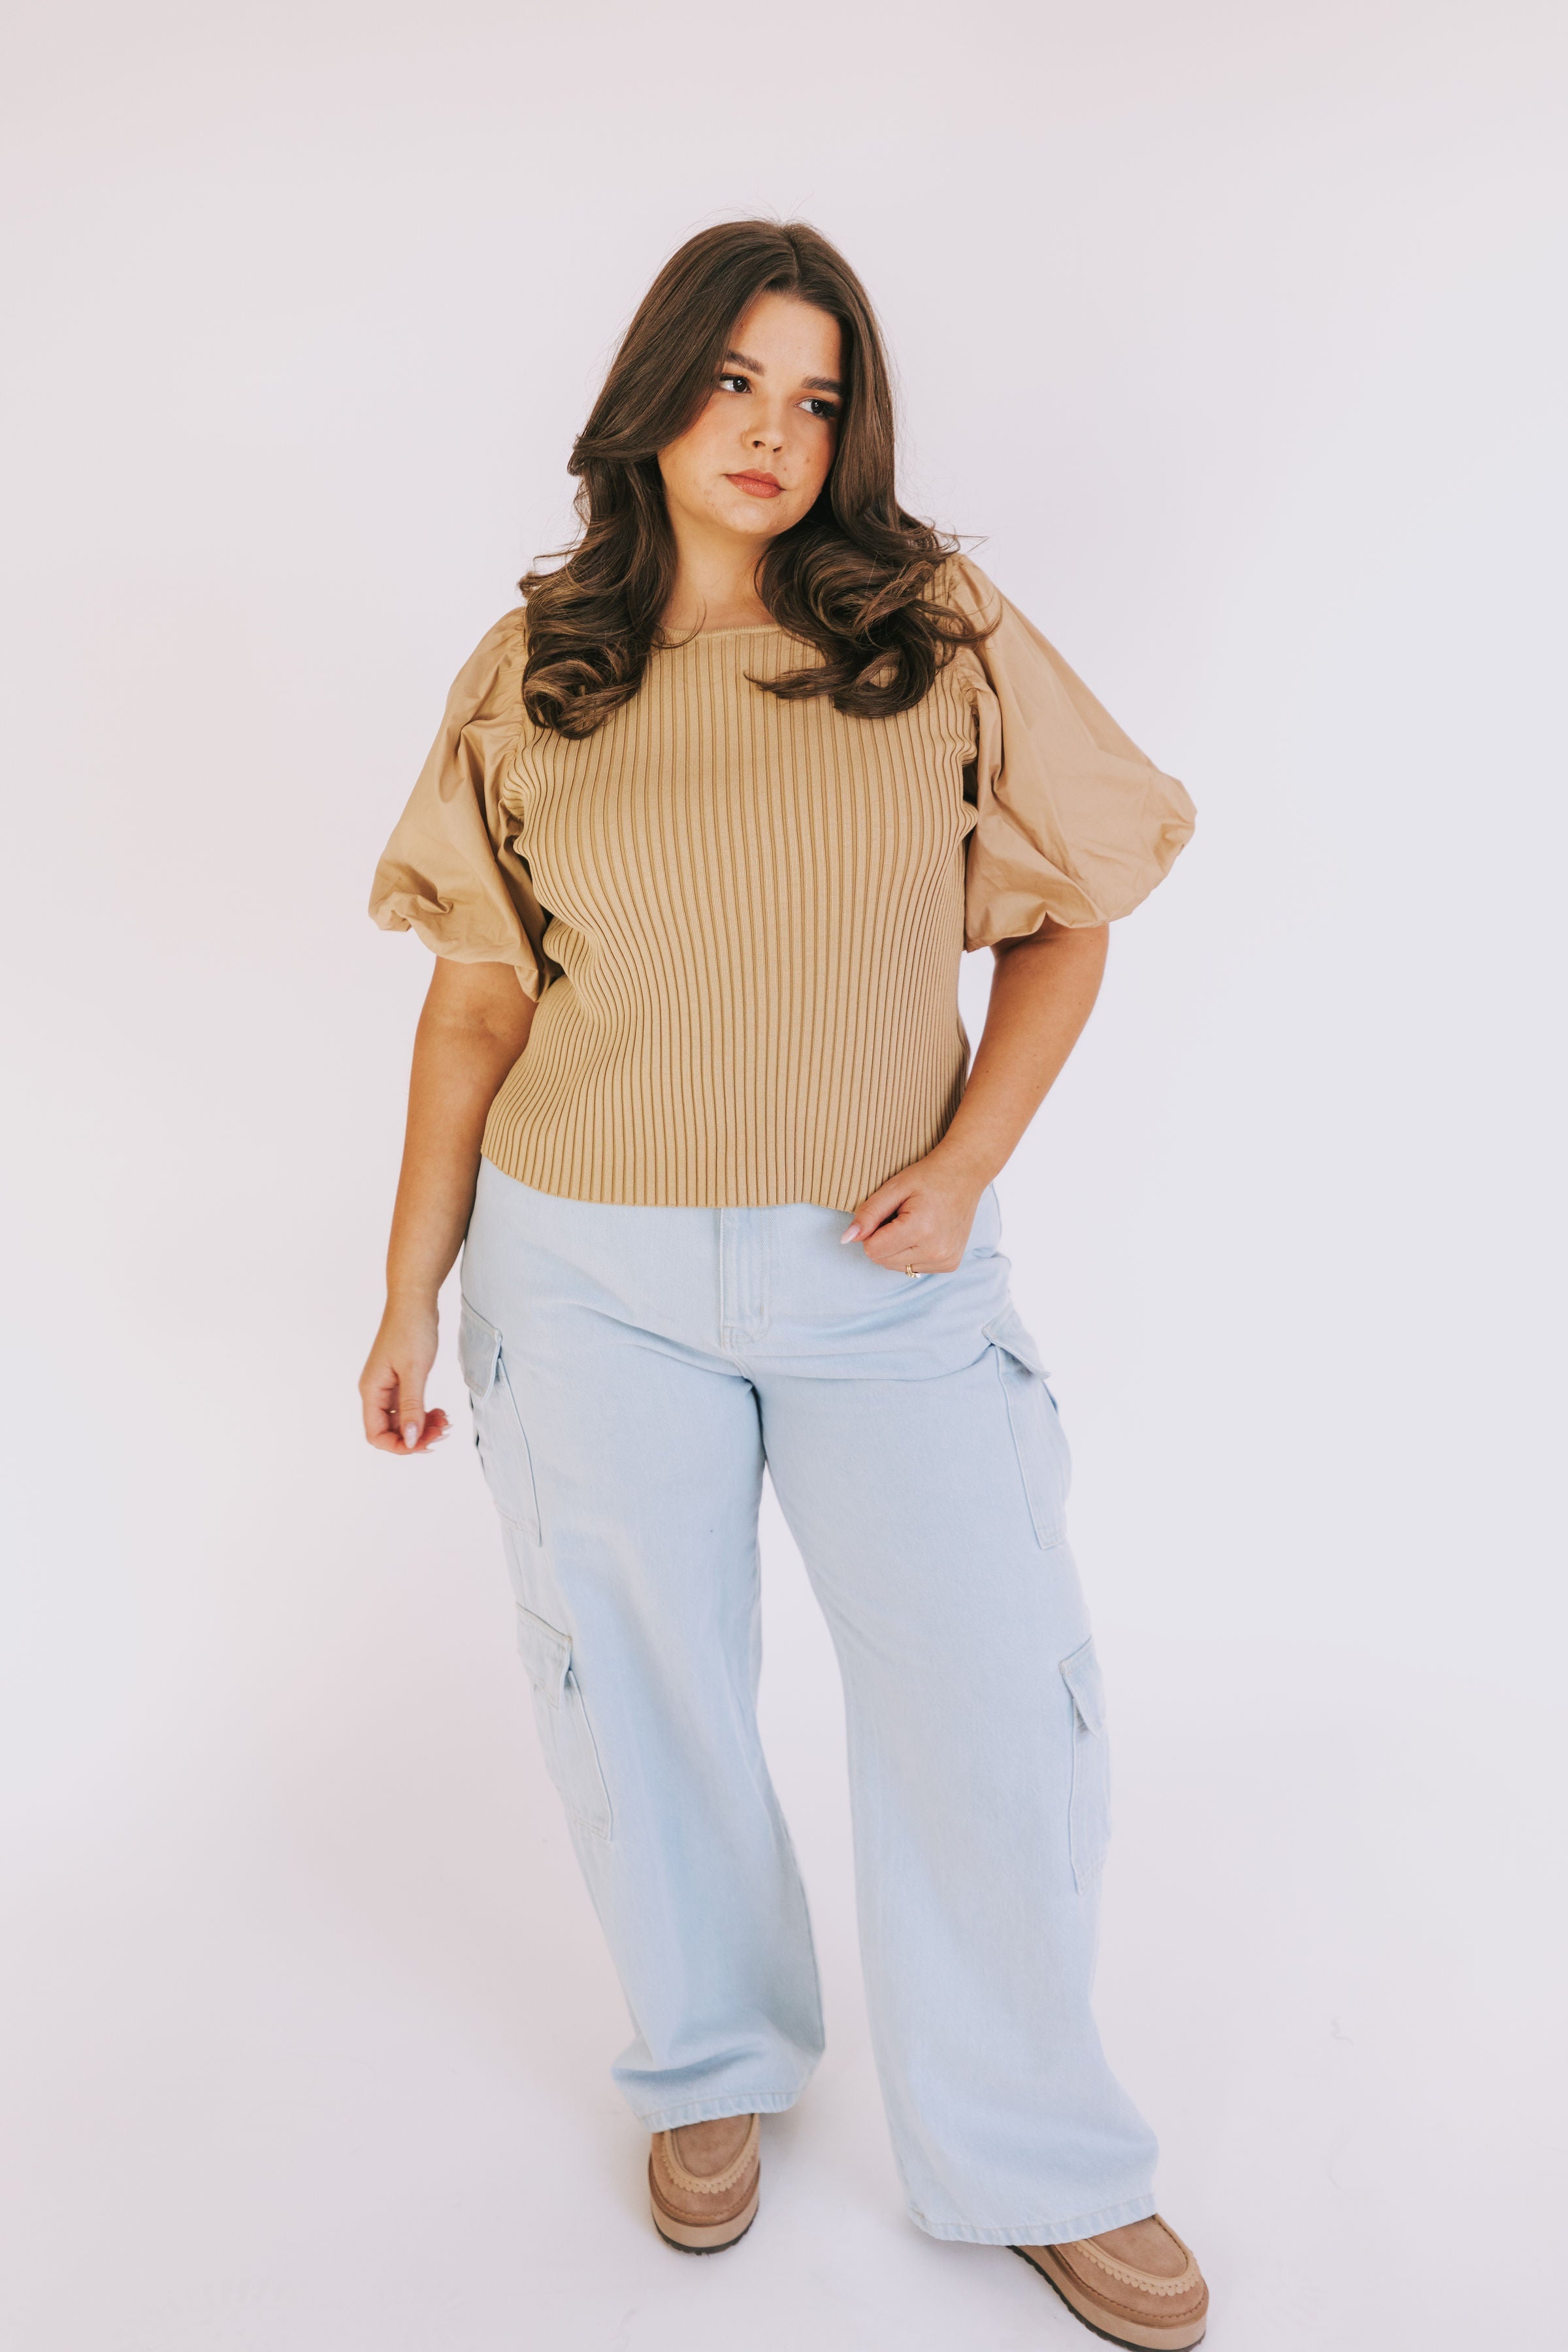 PLUS SIZE - Lost My Way Top